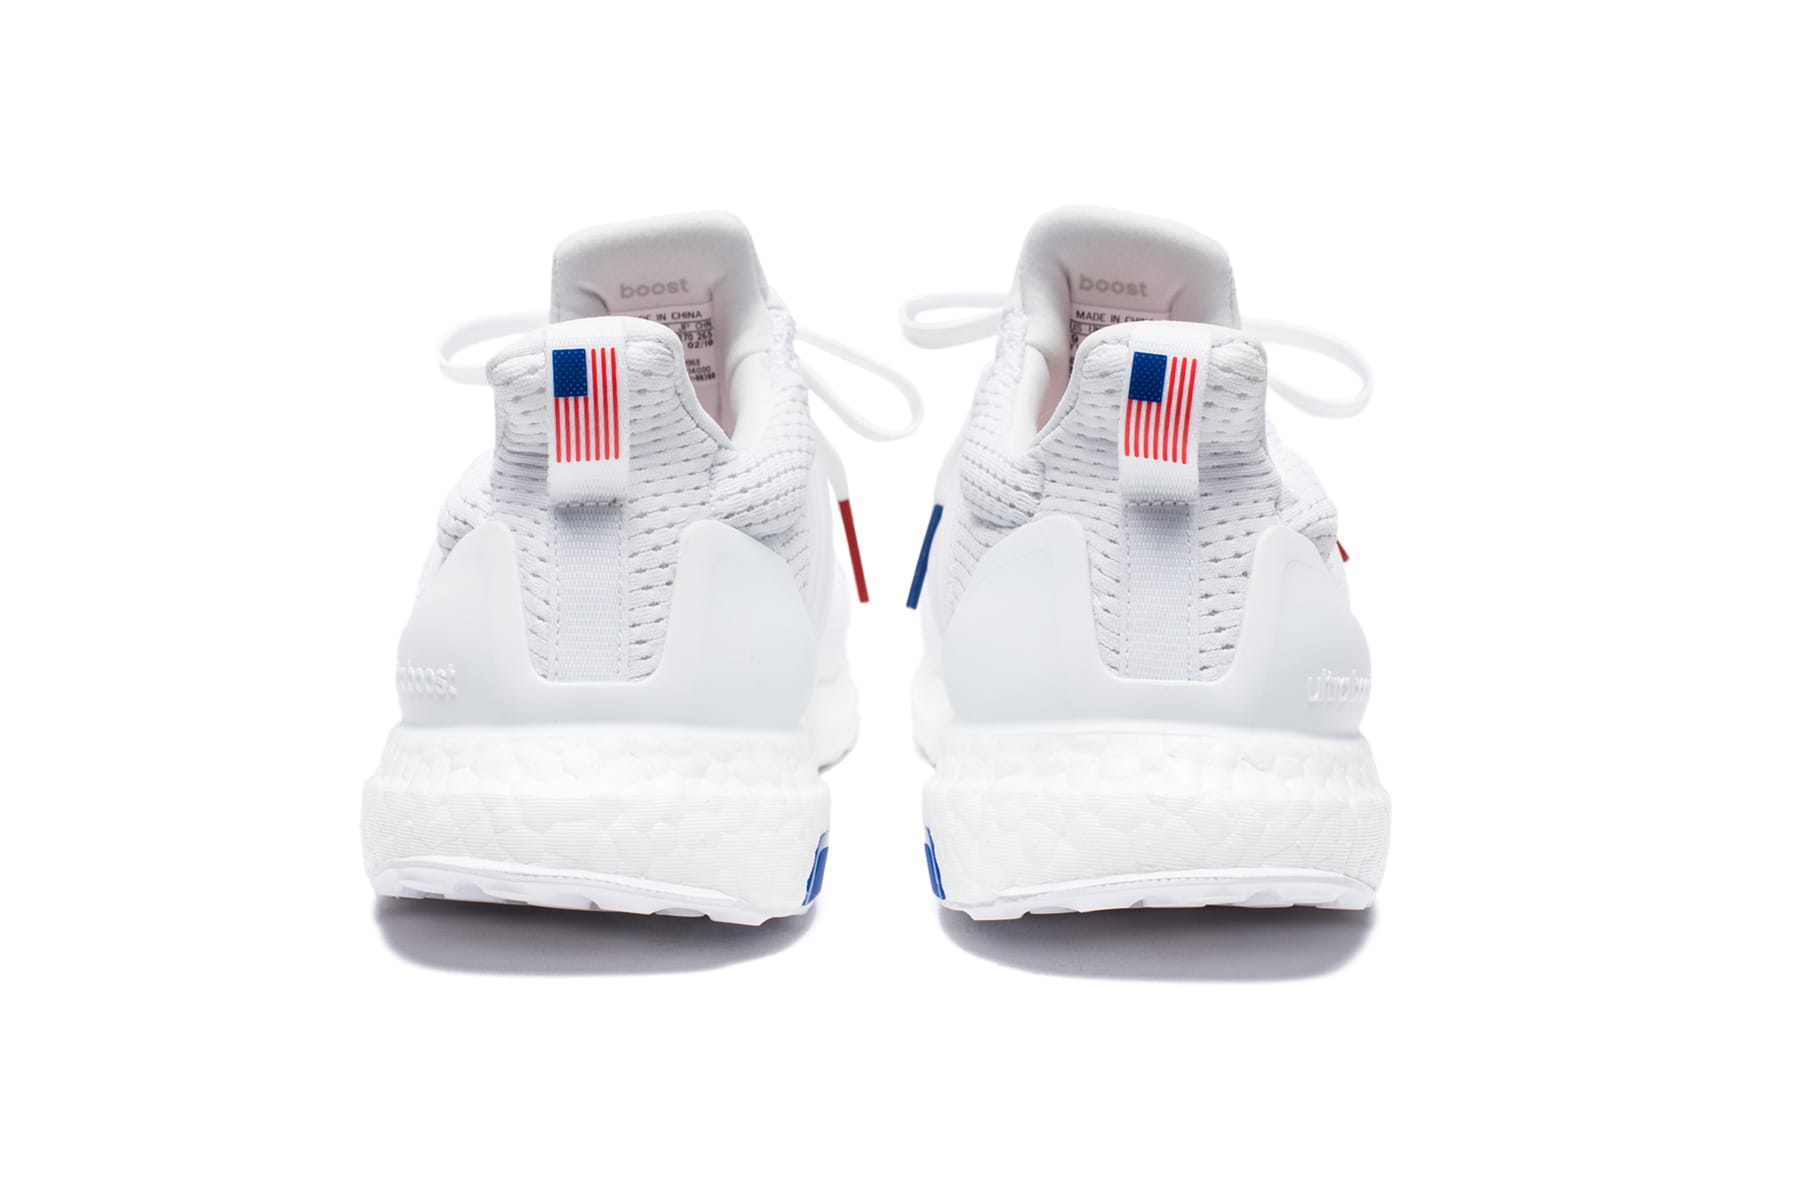 ultra boost 2.0 stars and stripes